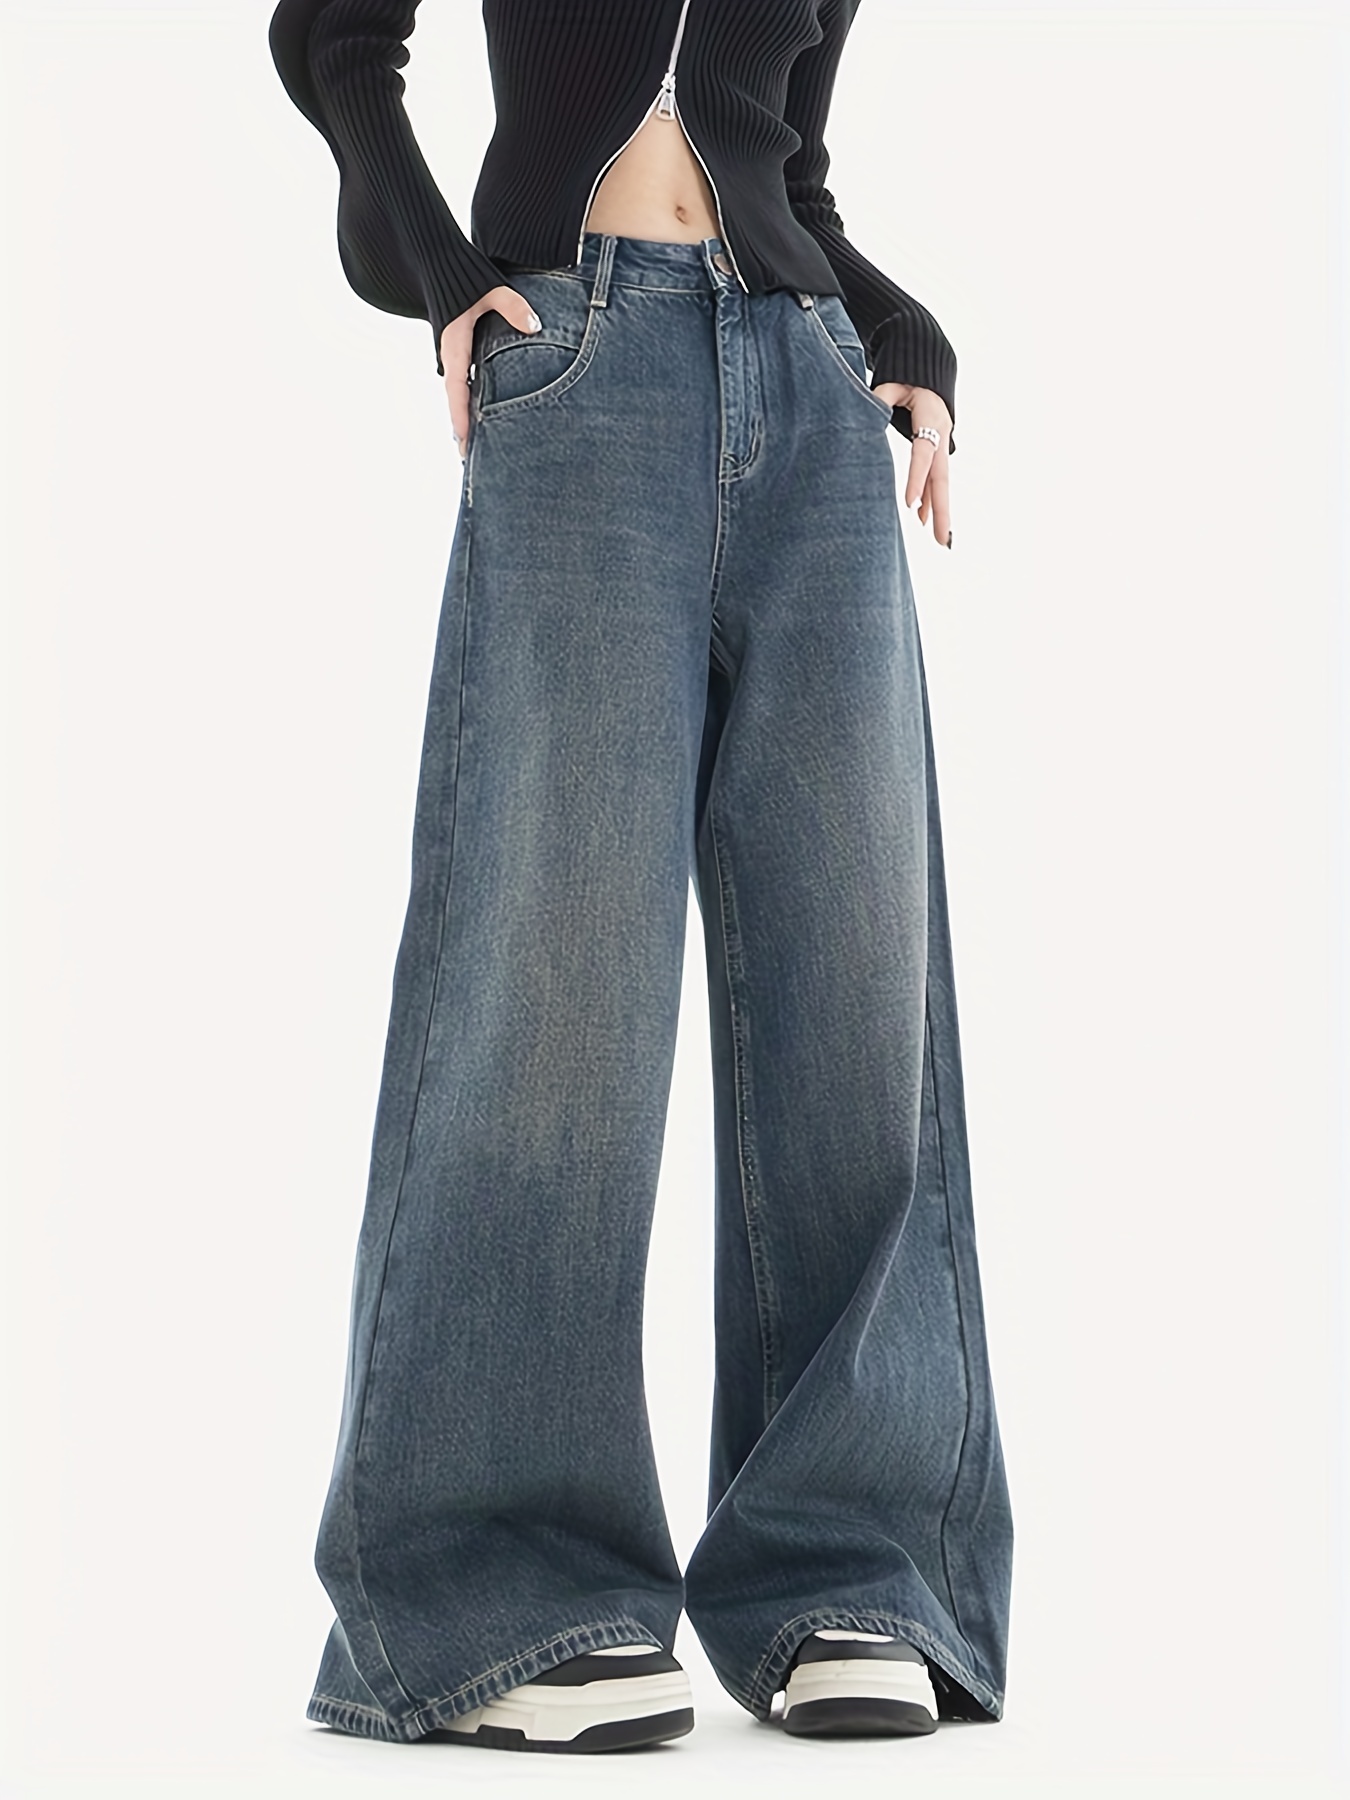  Baggy Jeans For Women High Waisted Bell Bottoms Jeans Outfit  For Women High Waisted Jeans For Teen Girls Trendy Baggy Cool Blue Size  X-Small Size 0 2